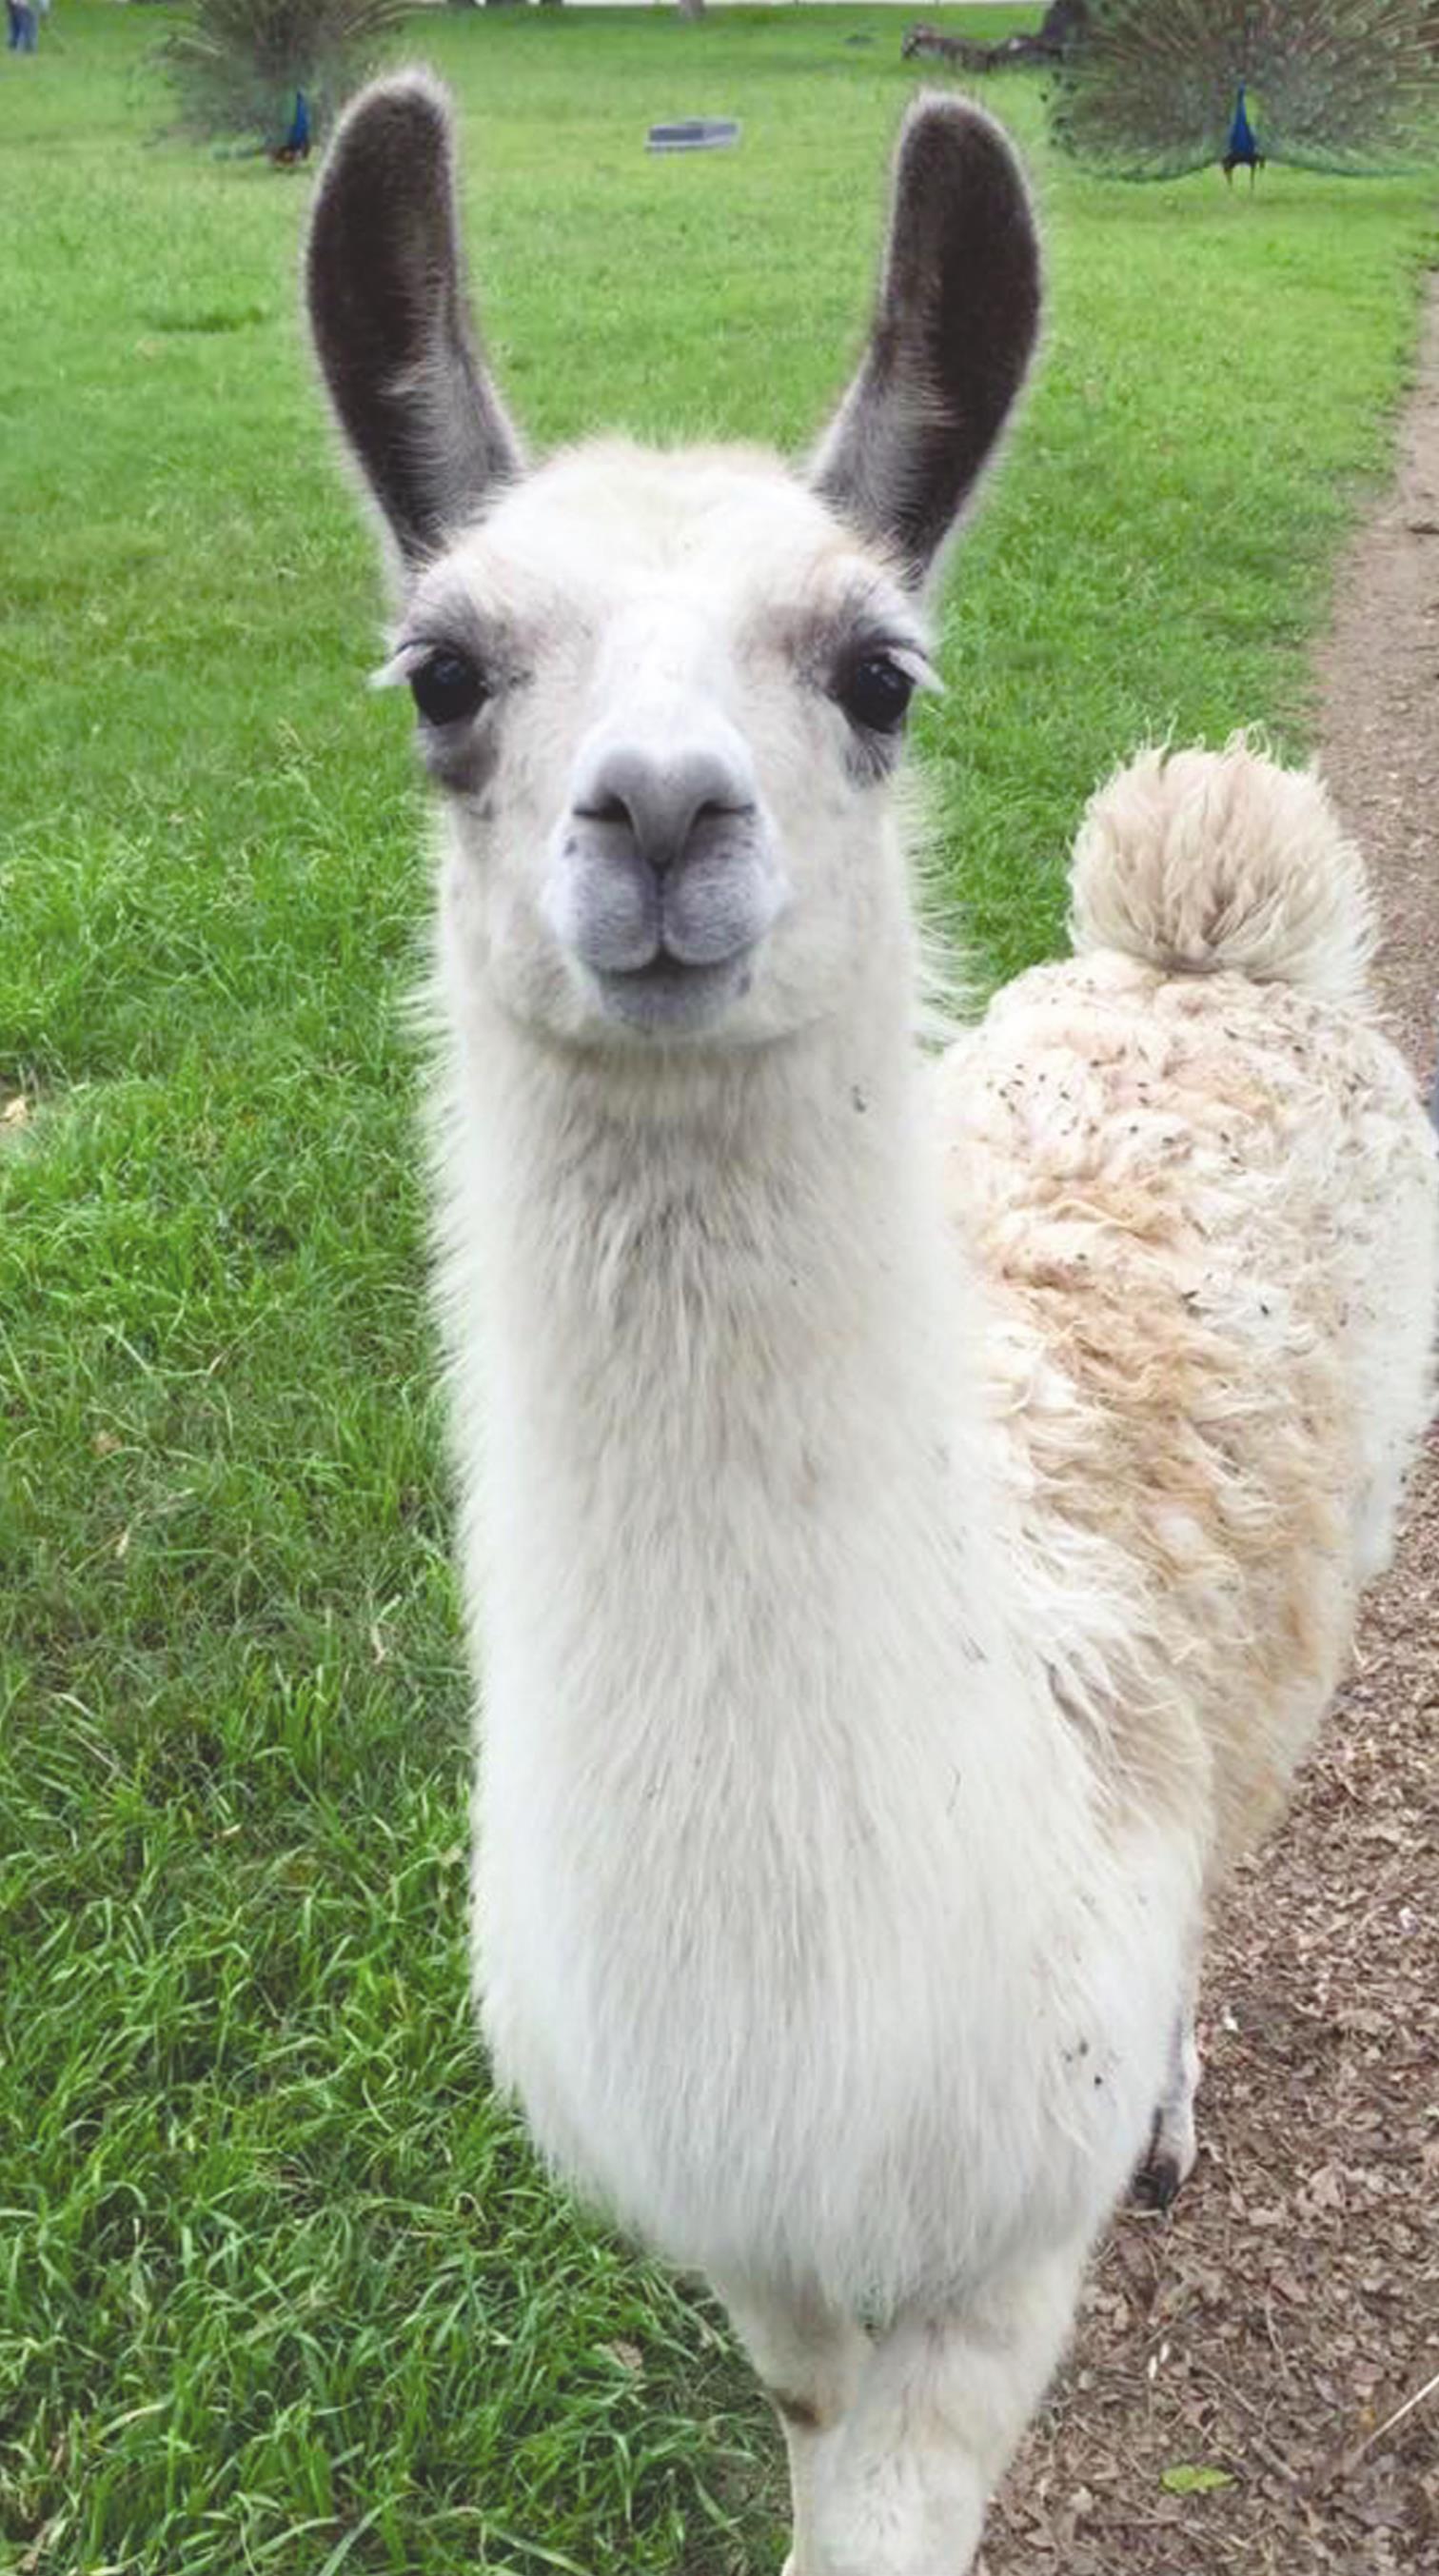 Potential owners who are considering adopting a llama or alpaca should take into account the important care these animals require, including vaccinations and routine dental care, as they are prone to tooth abscesses and require trims for overgrown incisors. Provided